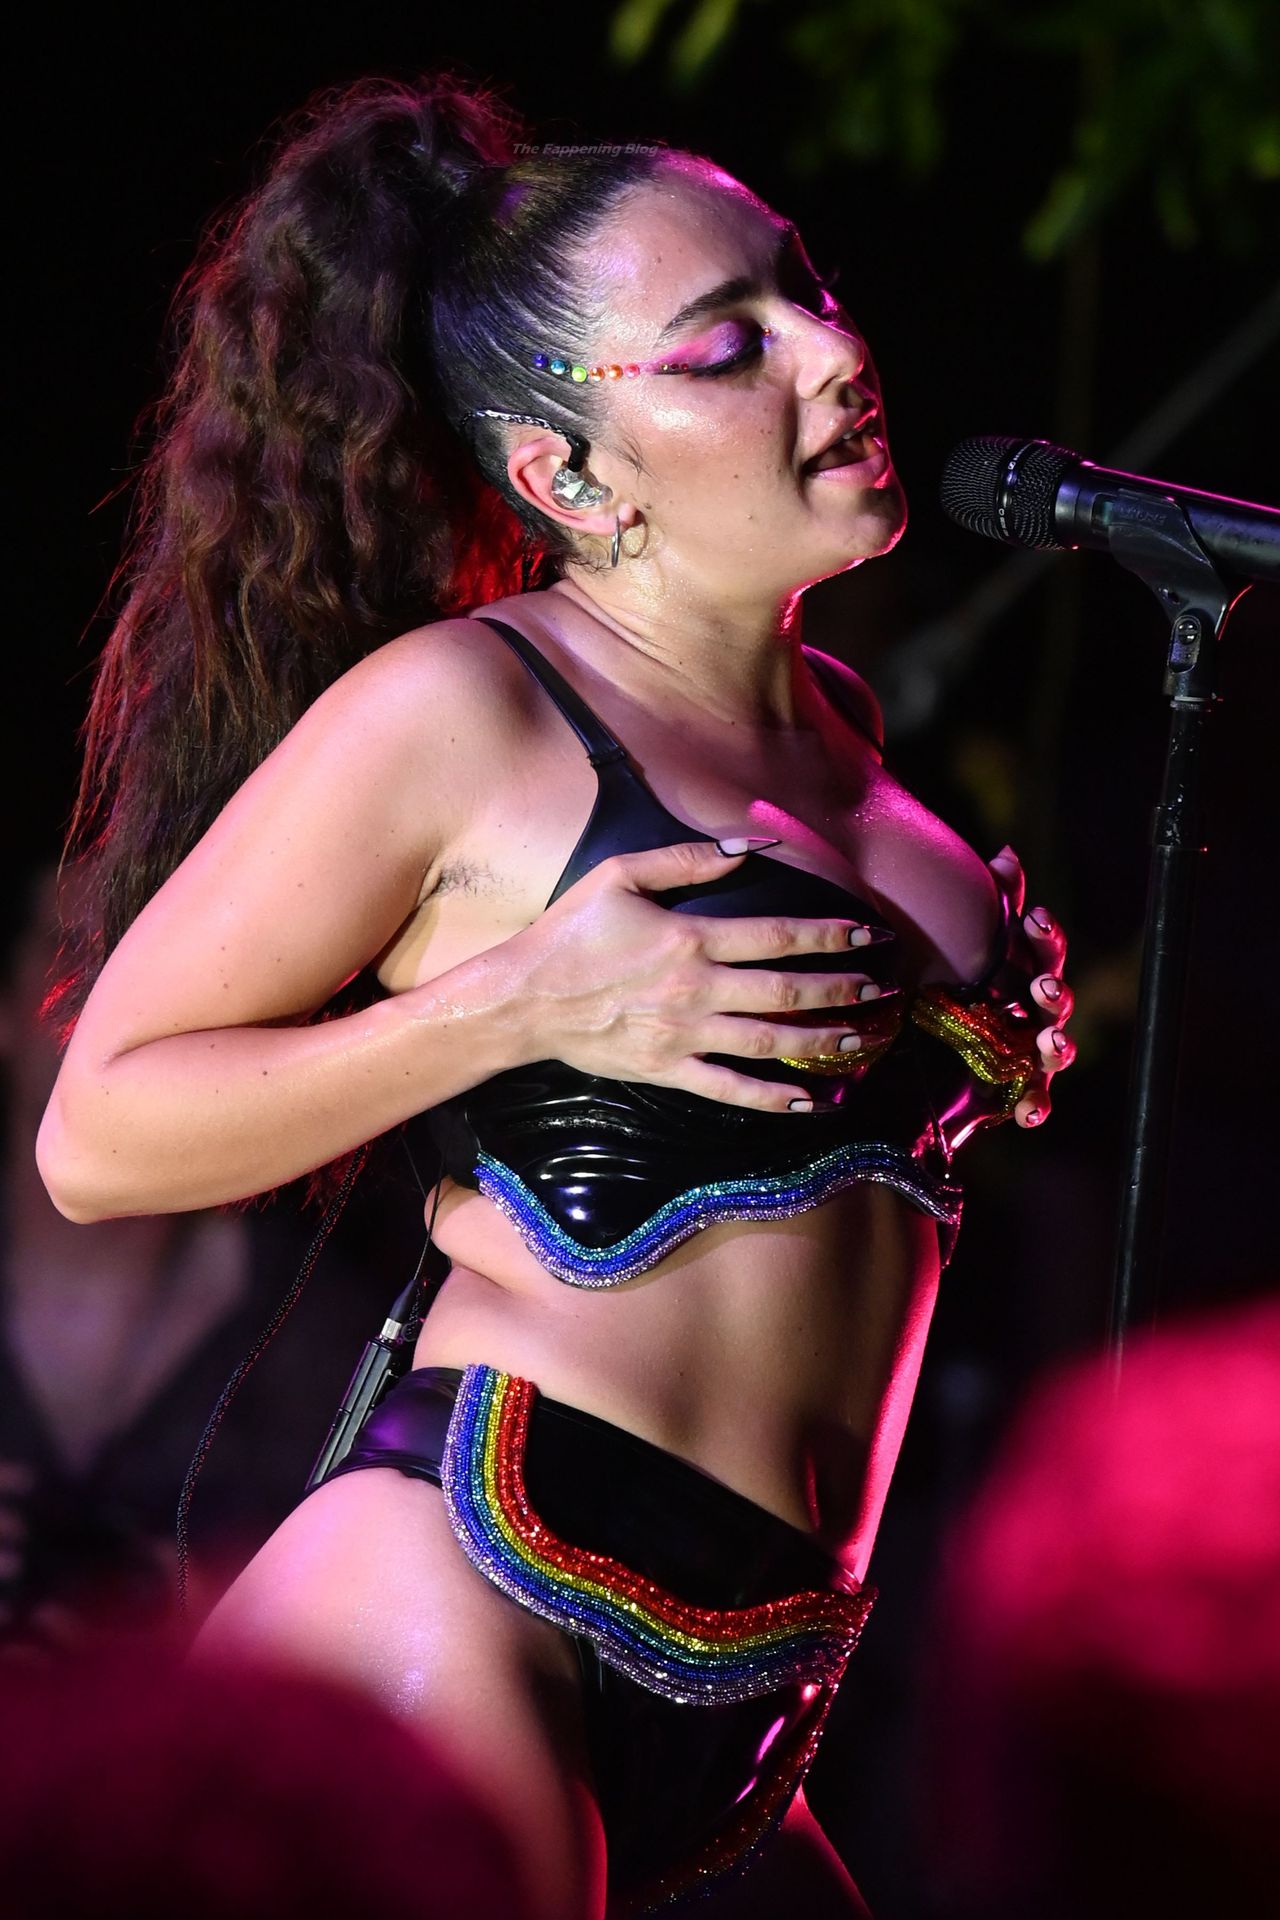 Charli-XCX-Sexy-The-Fappening-Blog-23.jpg